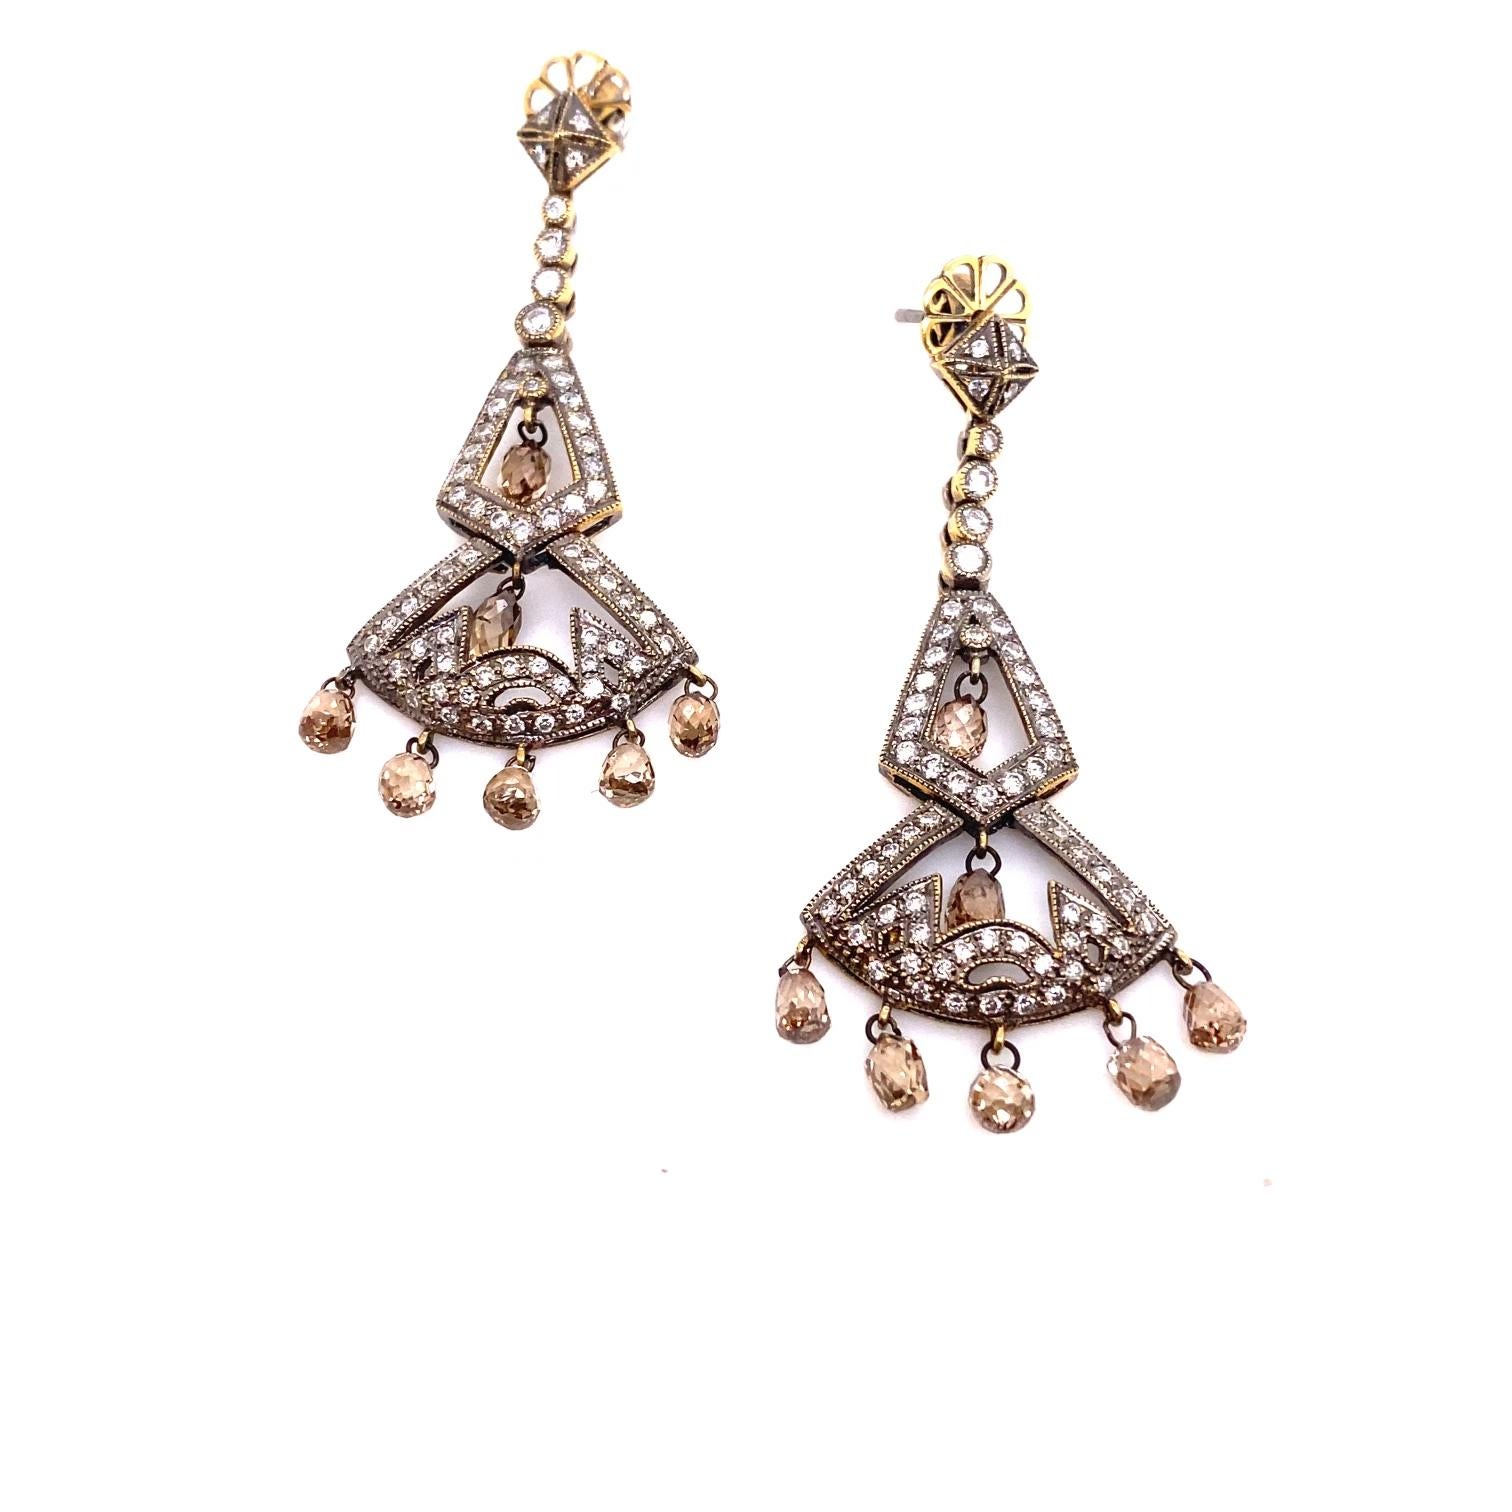 A magnificent pair of chandelier diamond earrings, with a Victorian inspired charm. Crafted in 18k gold, these earrings feature 4 carats total weight of champagne diamonds and round diamonds.  Champagne diamonds with a total of 2.5 carats are